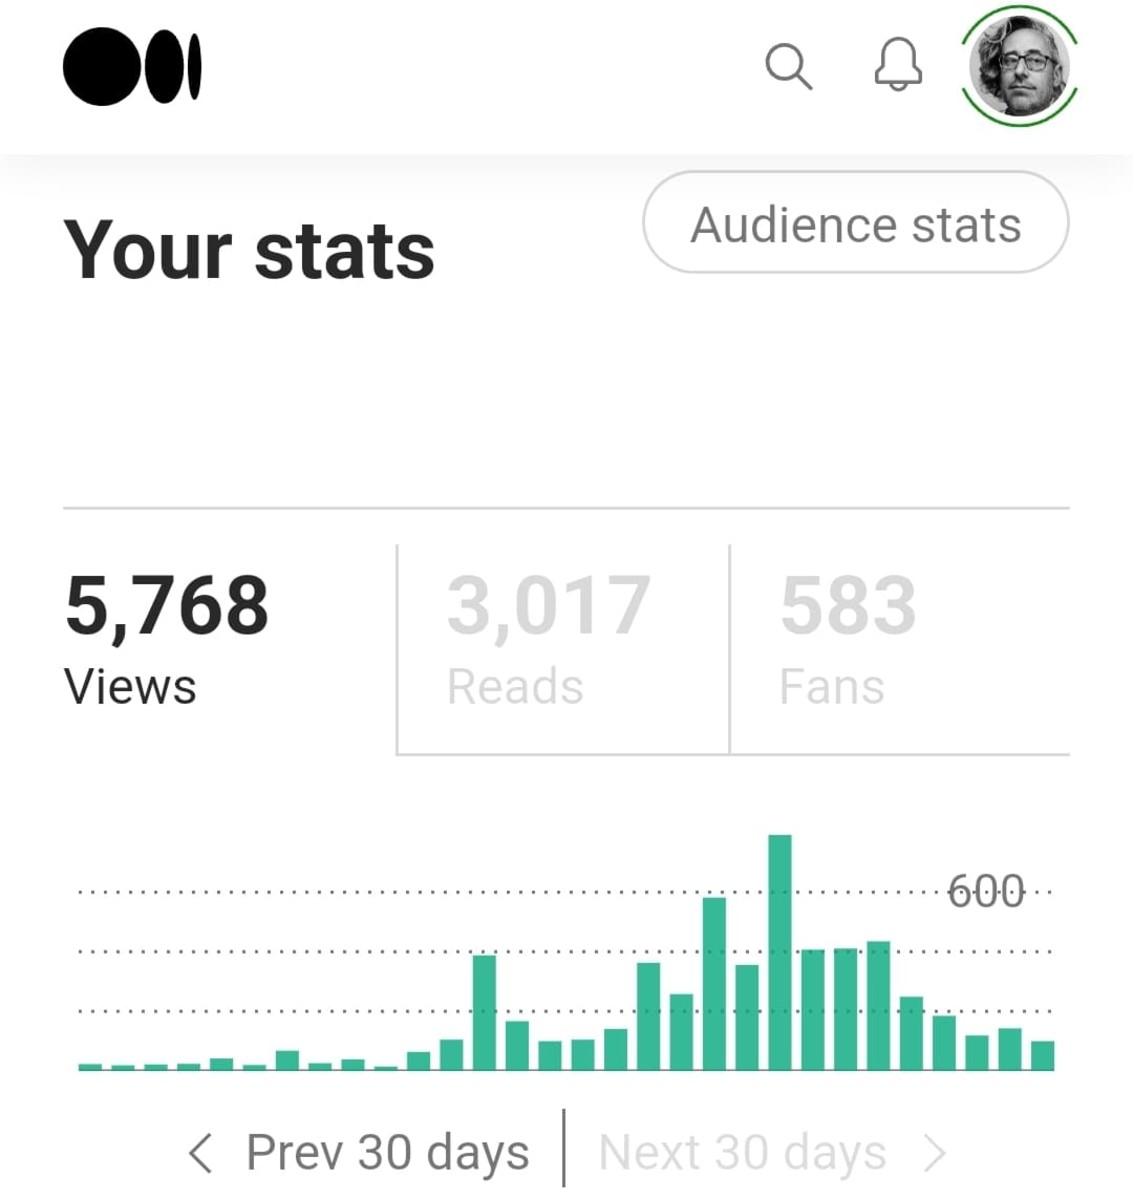 My blog stats are crushing the previous 30 days prior. Plus it’s far more fun to blog than to content write.